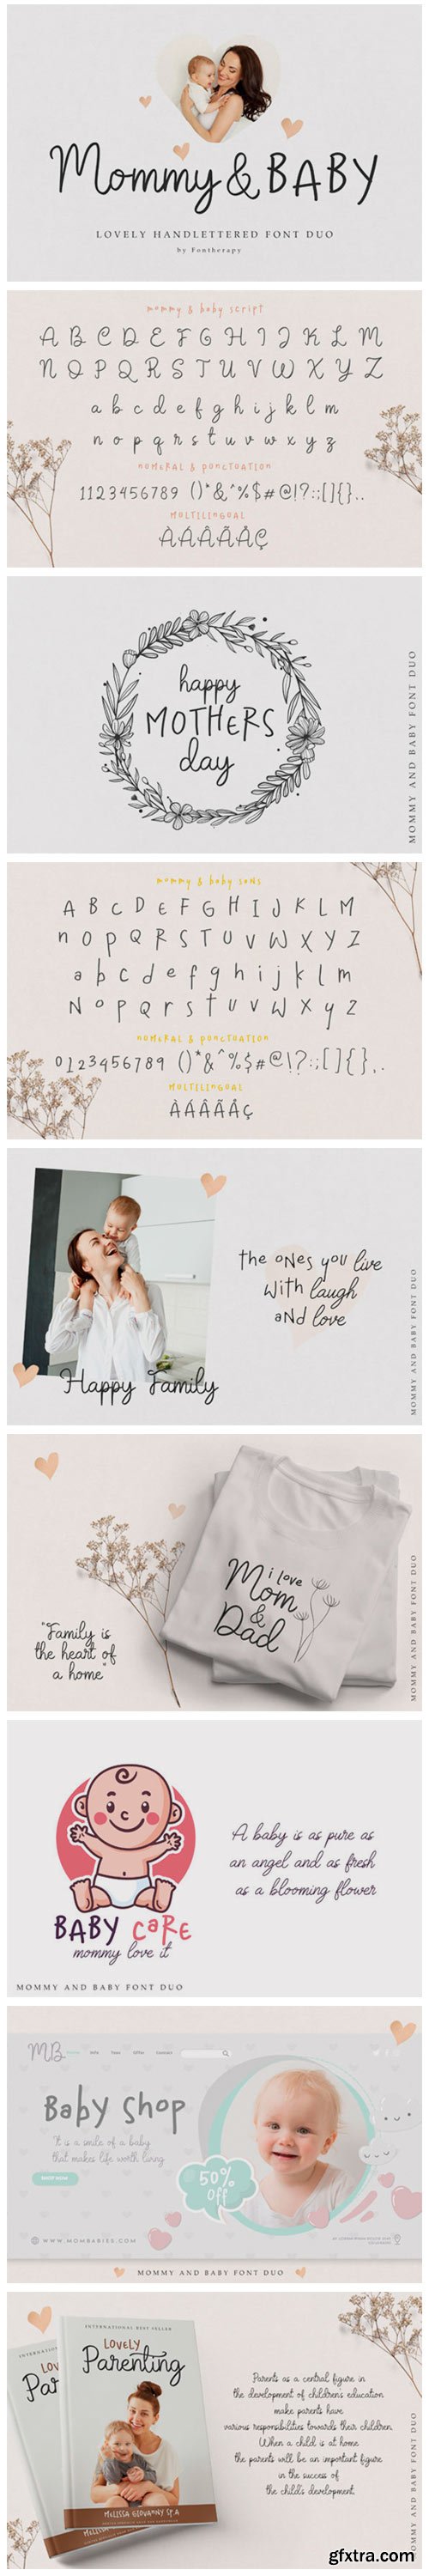 Mommy & Baby Font